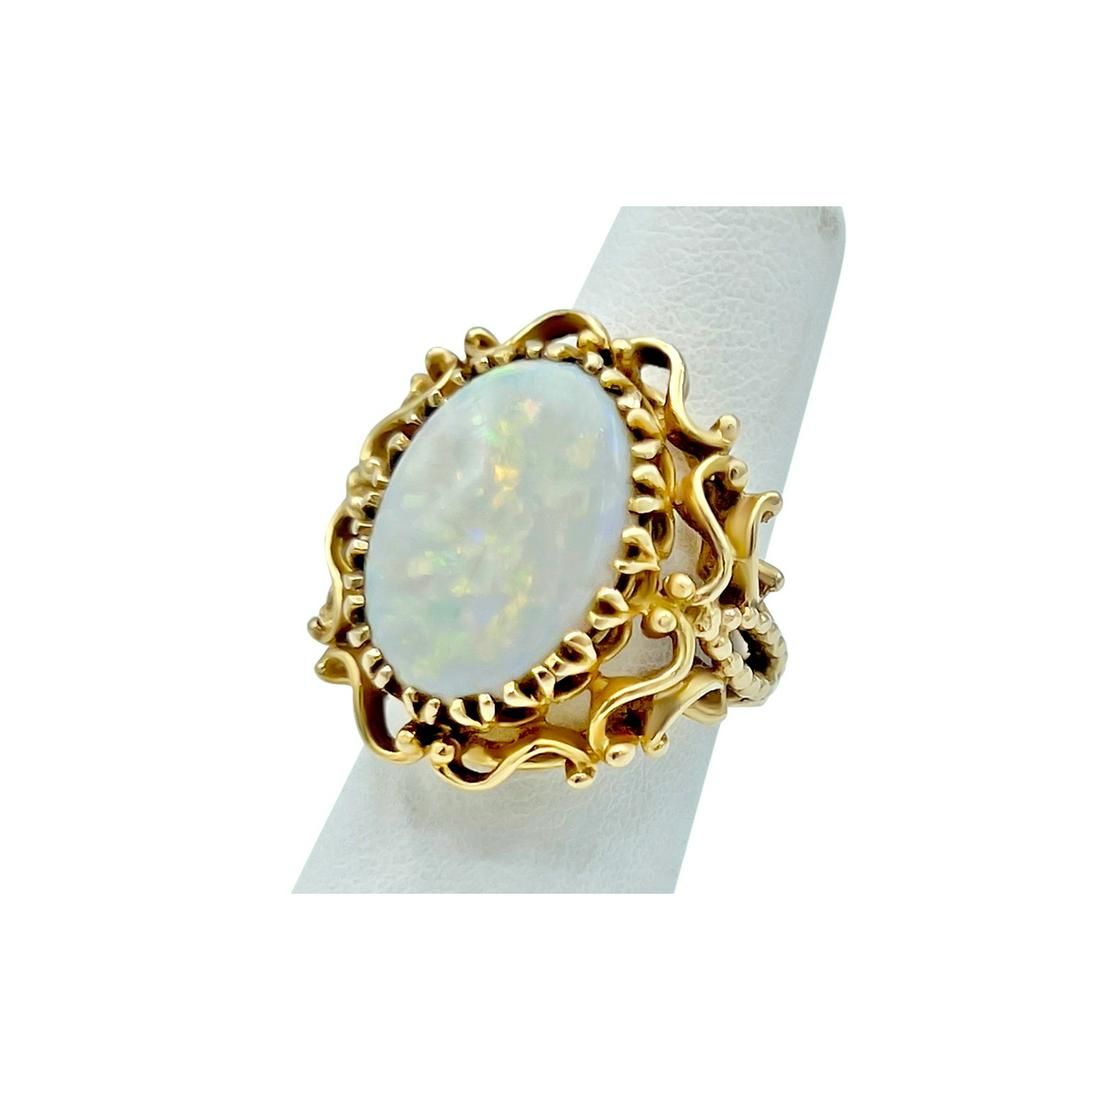 14K YELLOW GOLD FIERY OPAL WITH